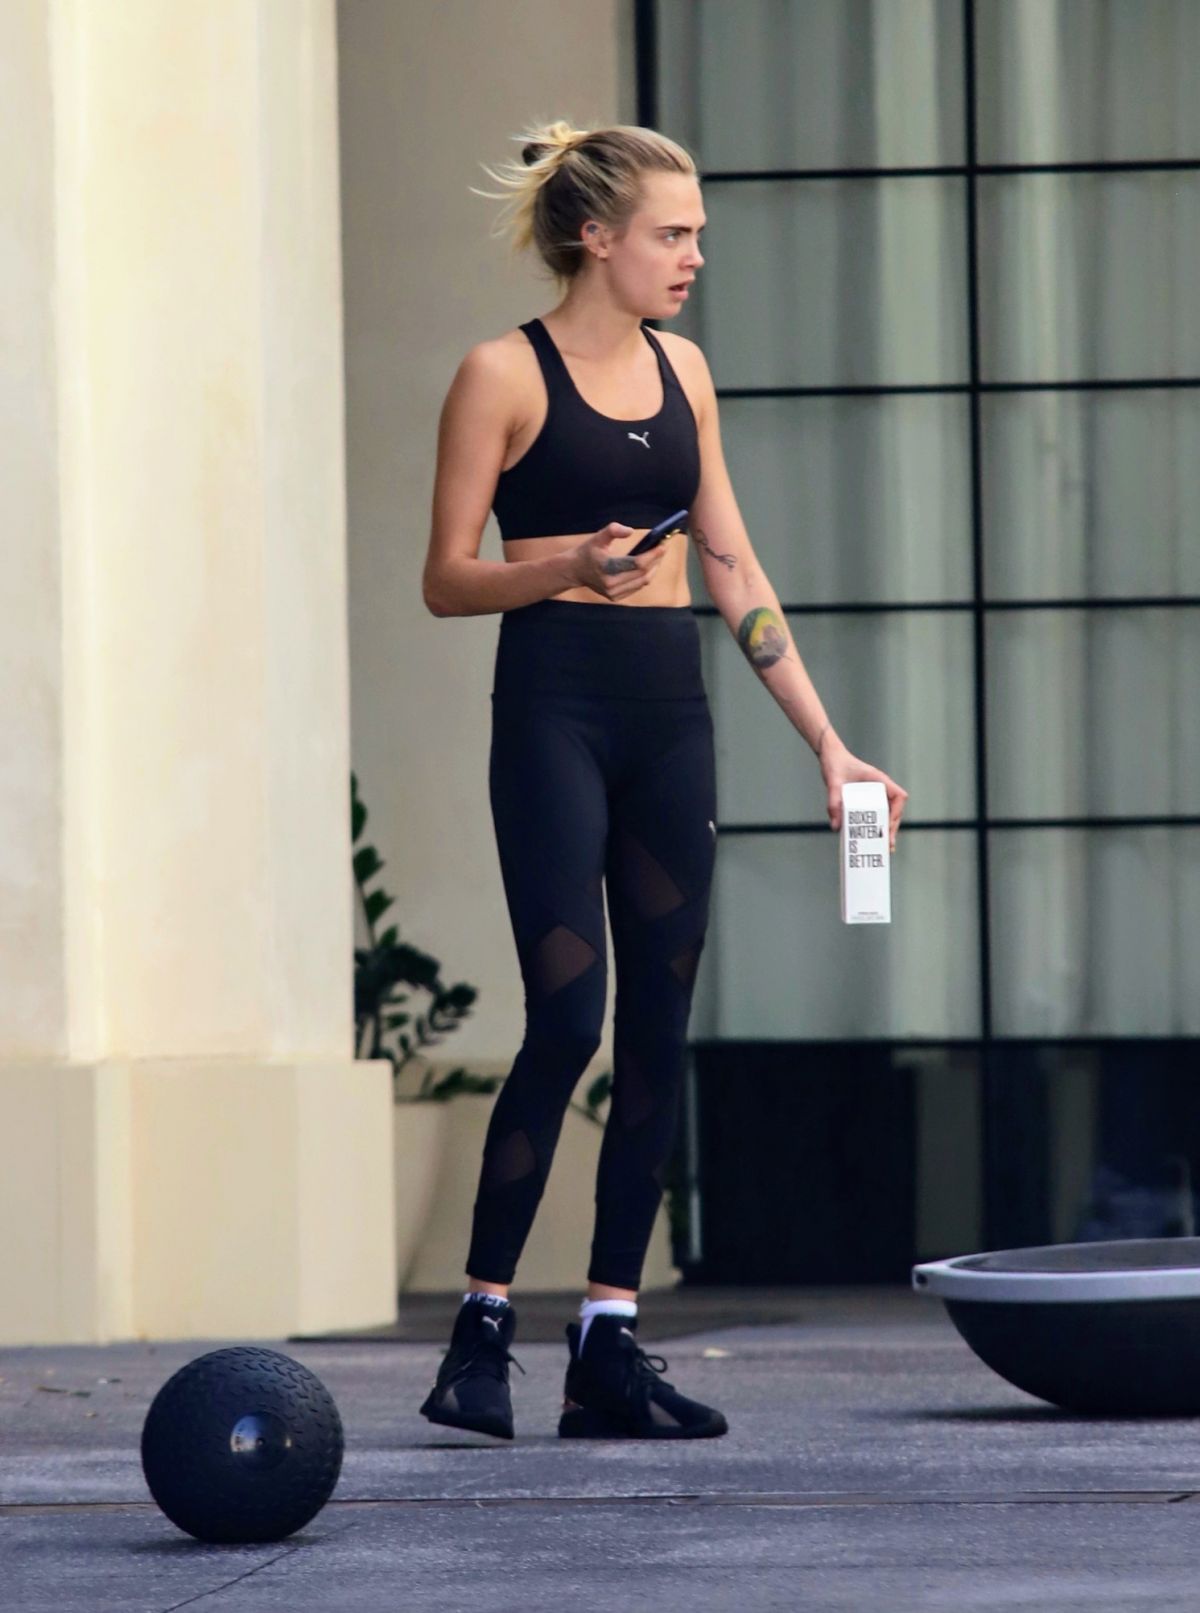 kaia-gerber-and-cara-delevingne-workout-at-a-gym-in-los-angeles-08-11-2020-13.jpg